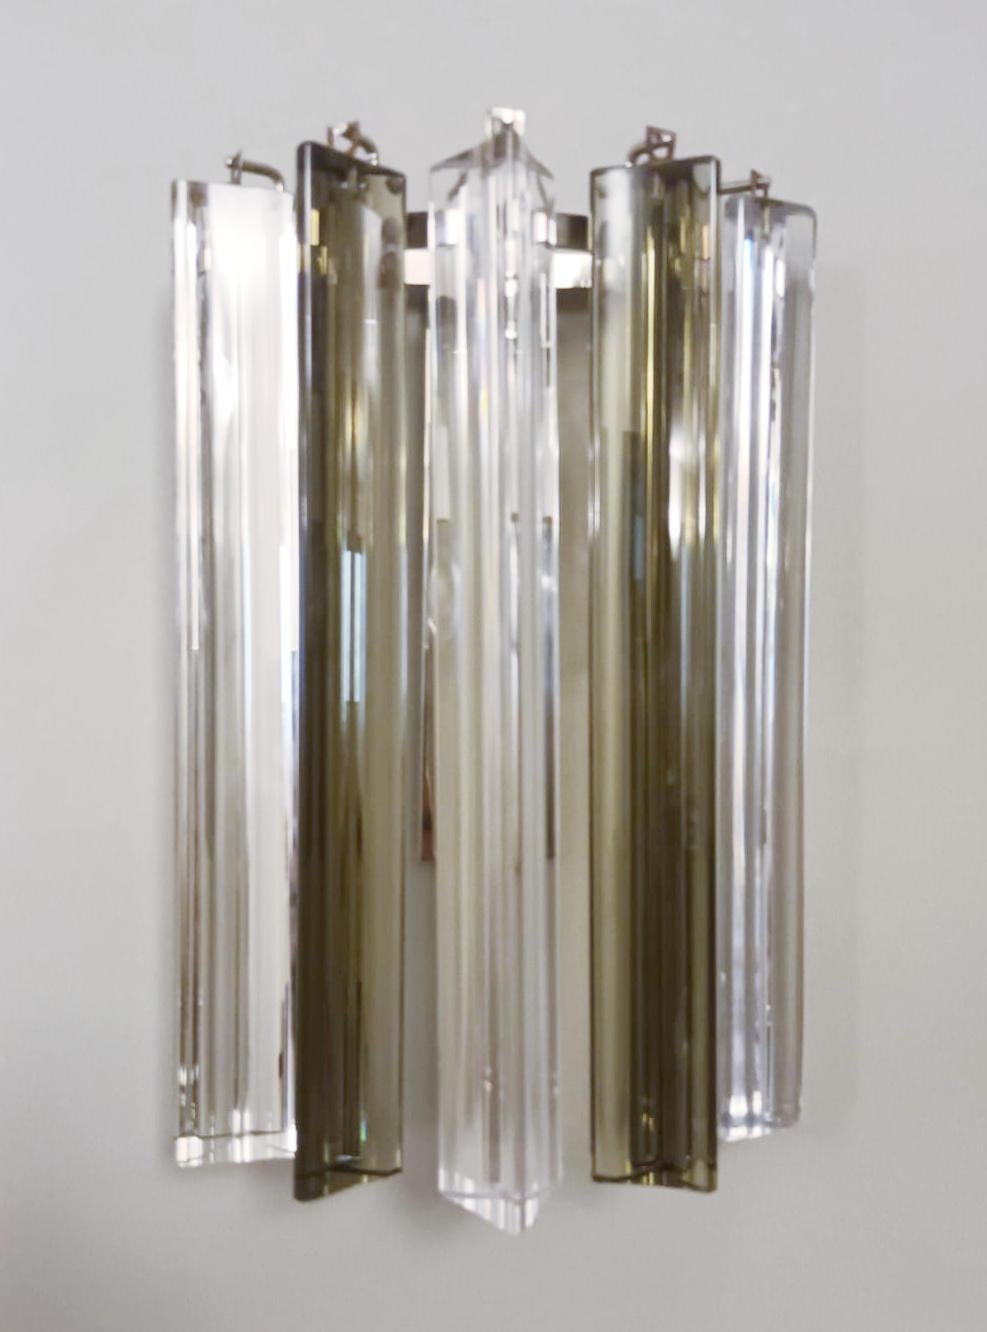 Pair of Italian wall lights with clear and smoky Triedri glass crystals mounted on chrome brackets / Made by Venini, circa 1960s
Measures: Height 12 inches, width 8 inches, depth 4 inches
1 light / E12 or E14 type / max 40W
1 pair available in